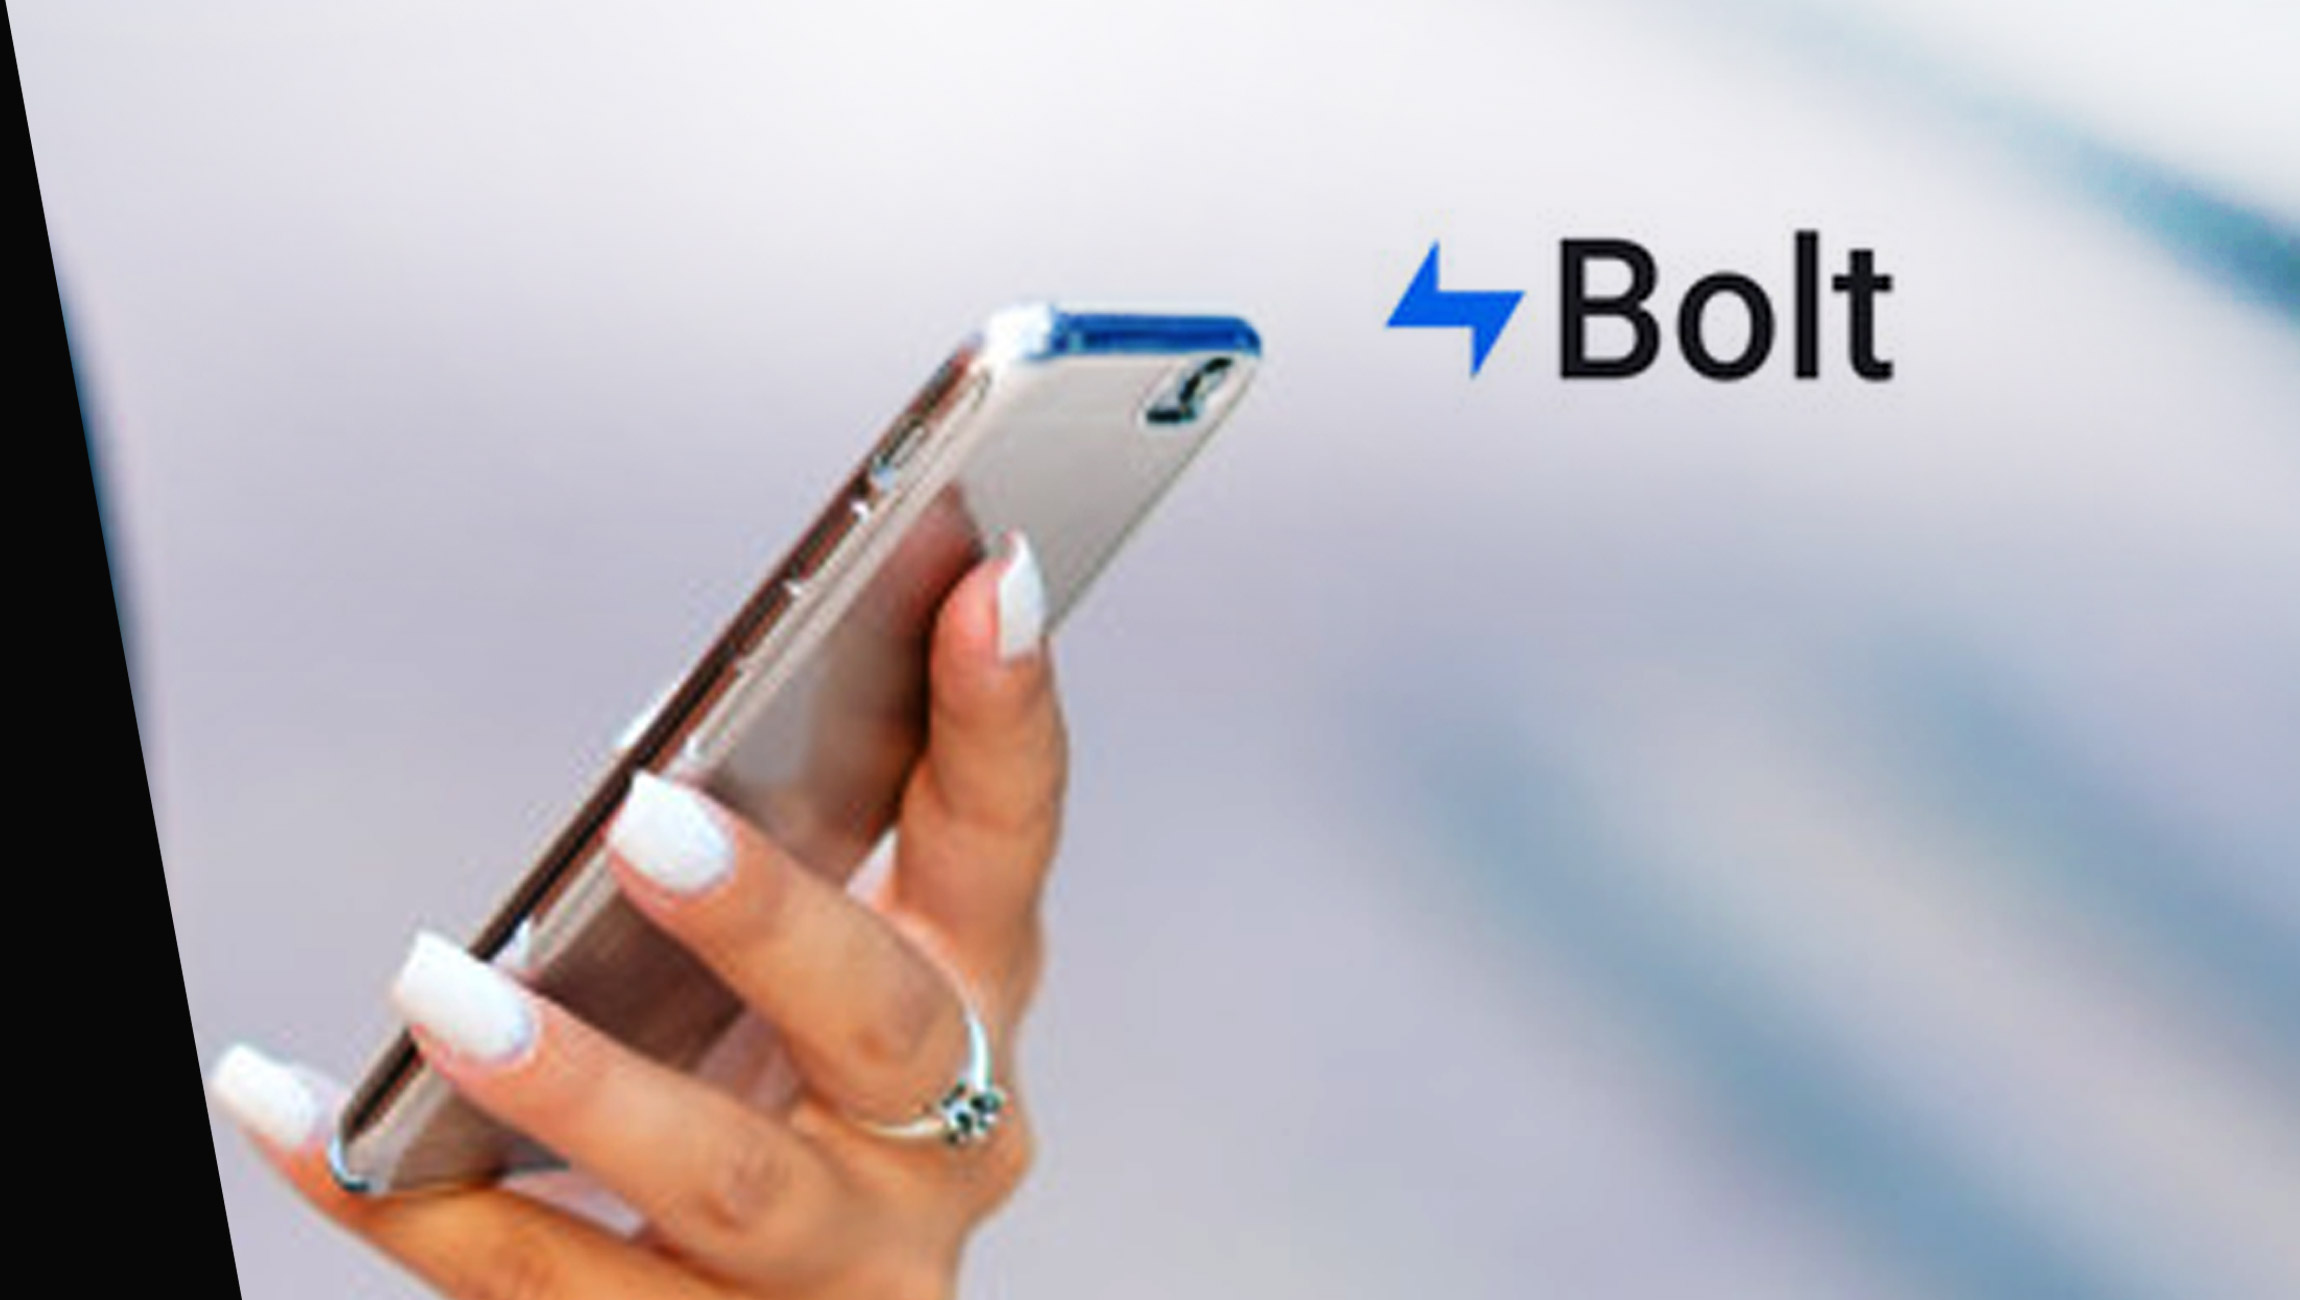 Bolt Expands Into Europe with PrestaShop and LVMH Brand Benefit Cosmetics